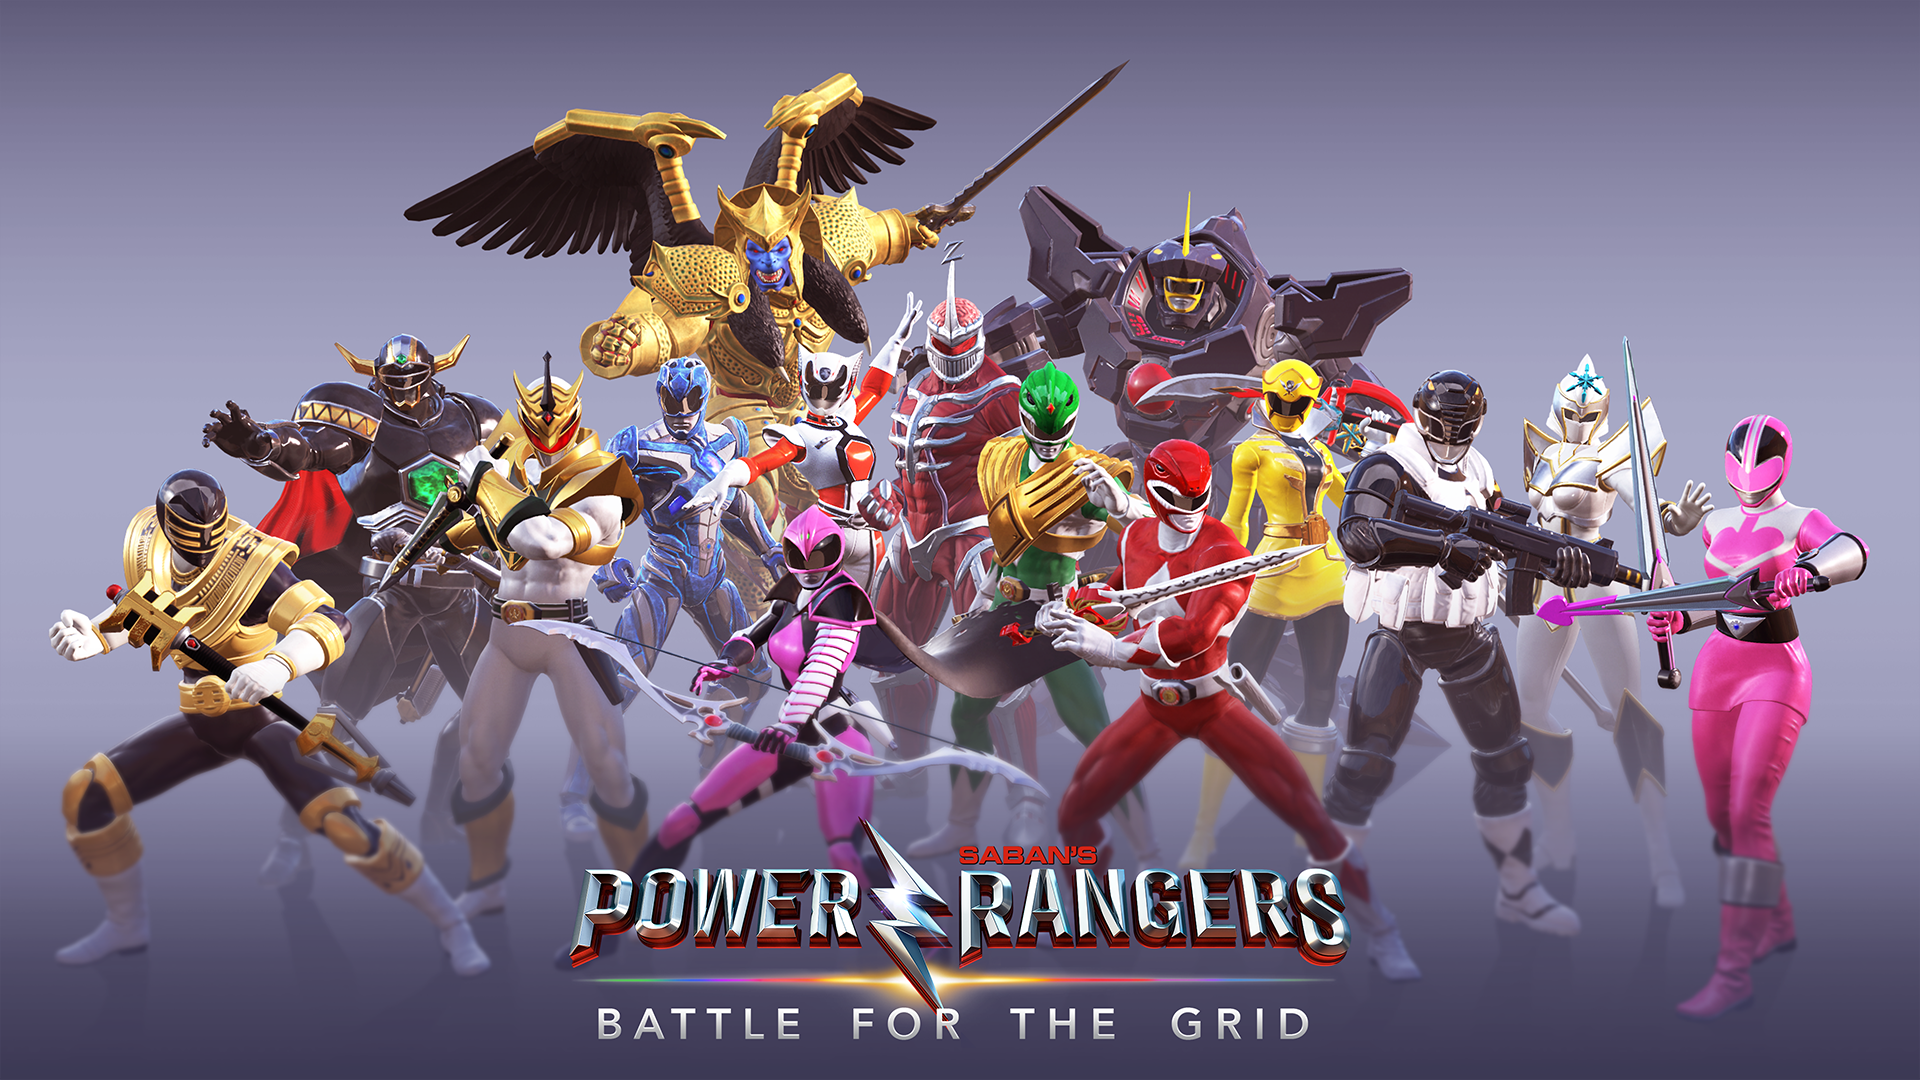 Power Rangers: Battle for the Grid Implements Crossplay, Cross